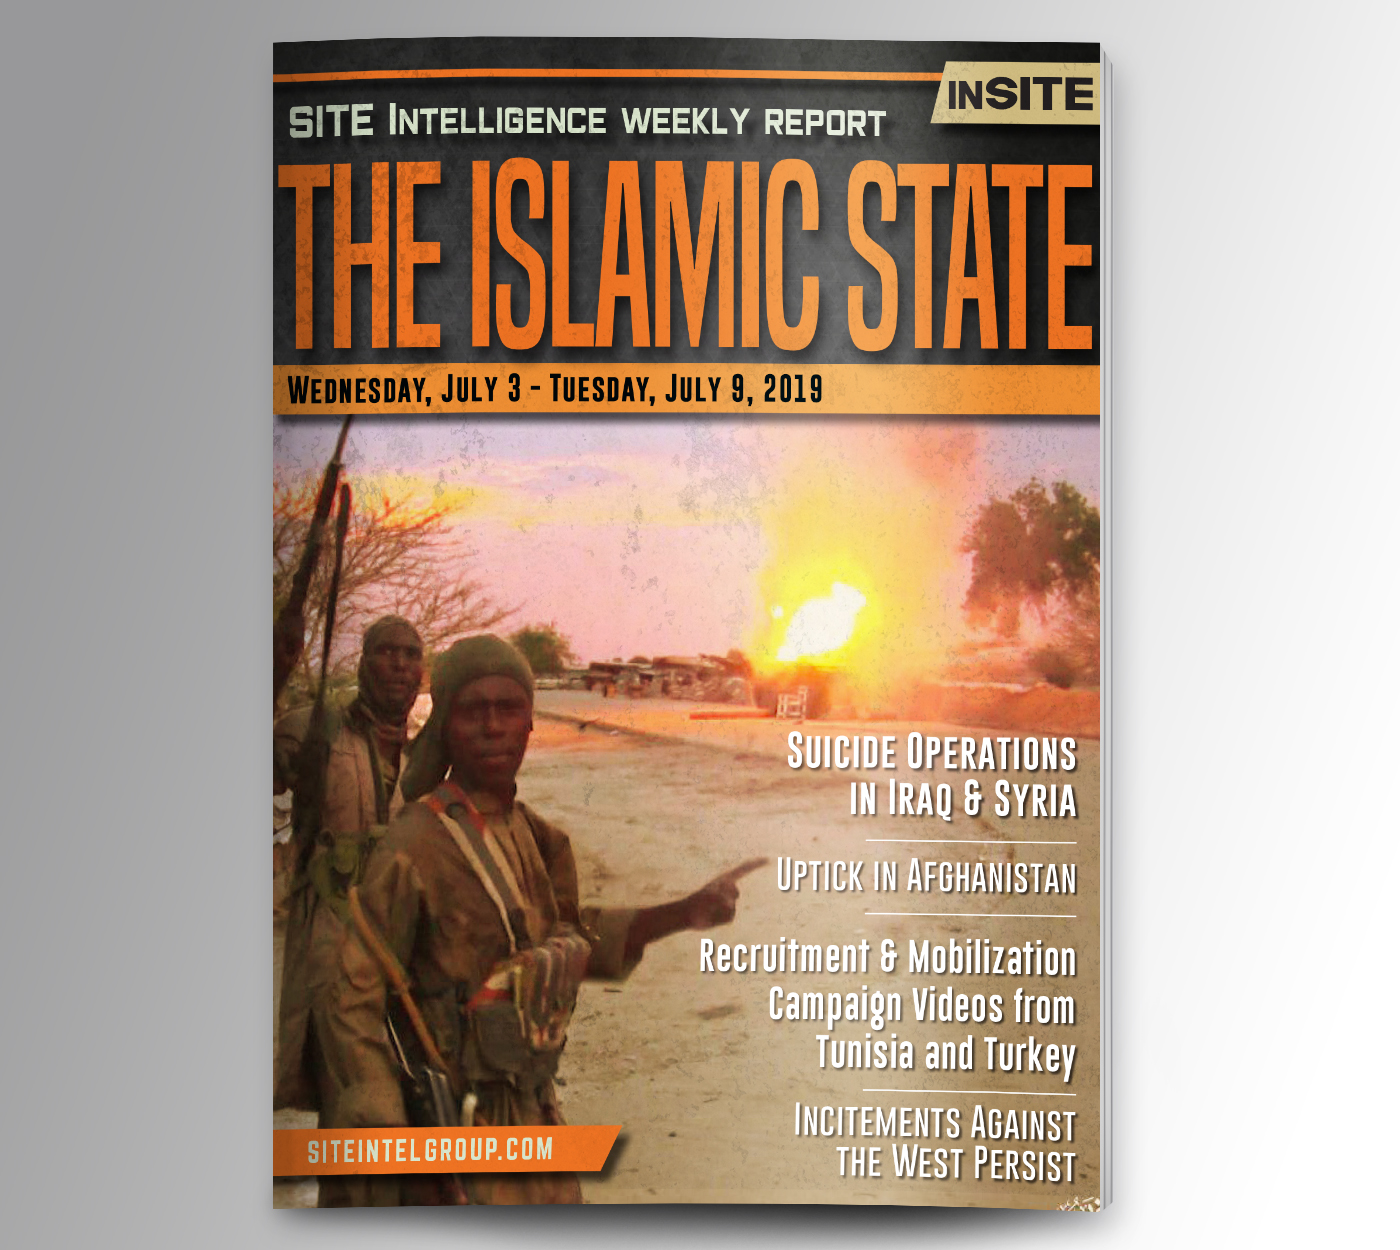 Weekly inSITE on the Islamic State for July 10-16, 2019